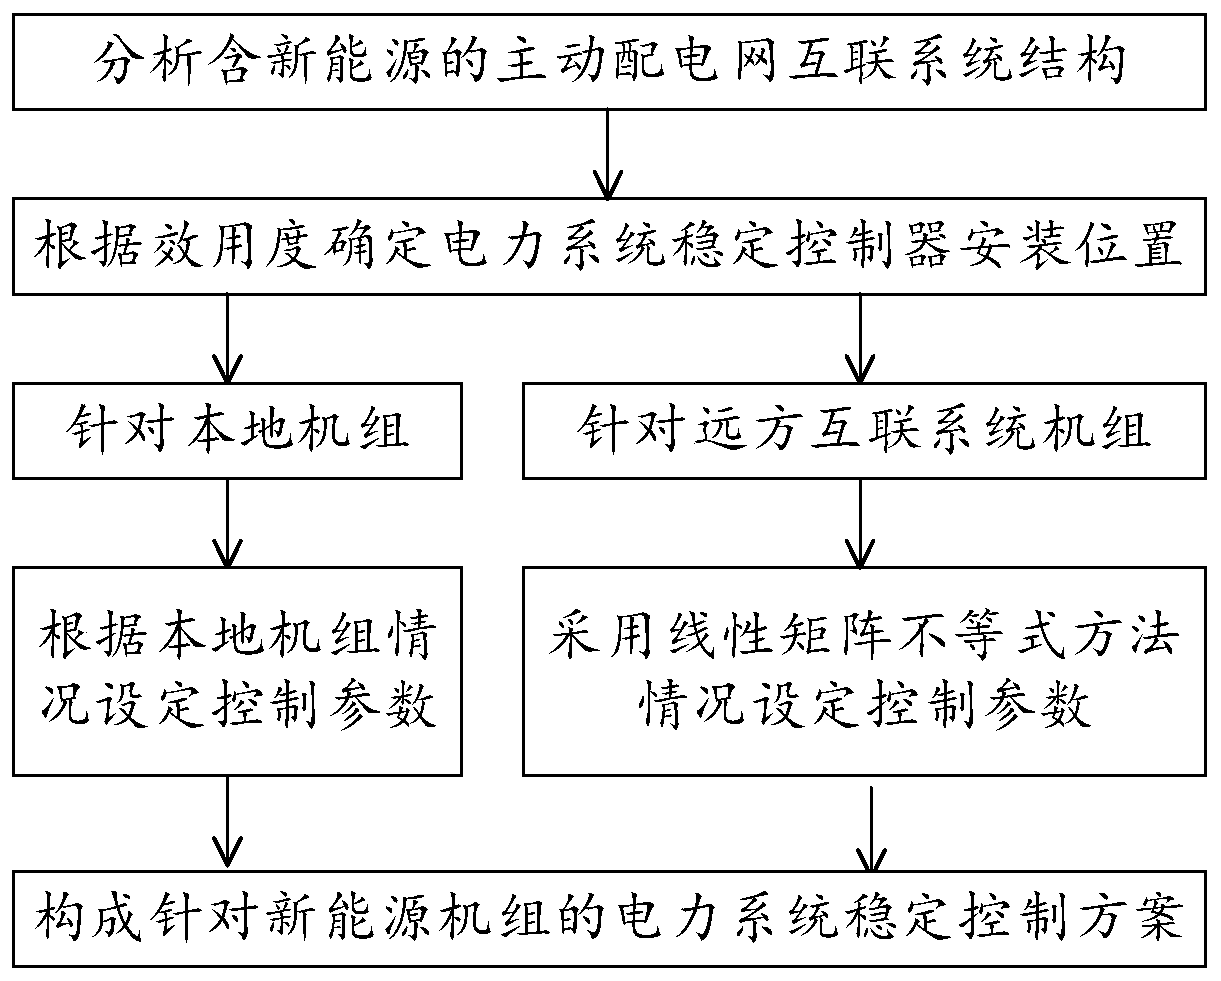 Active power distribution network interconnection system stability control method considering new energy access